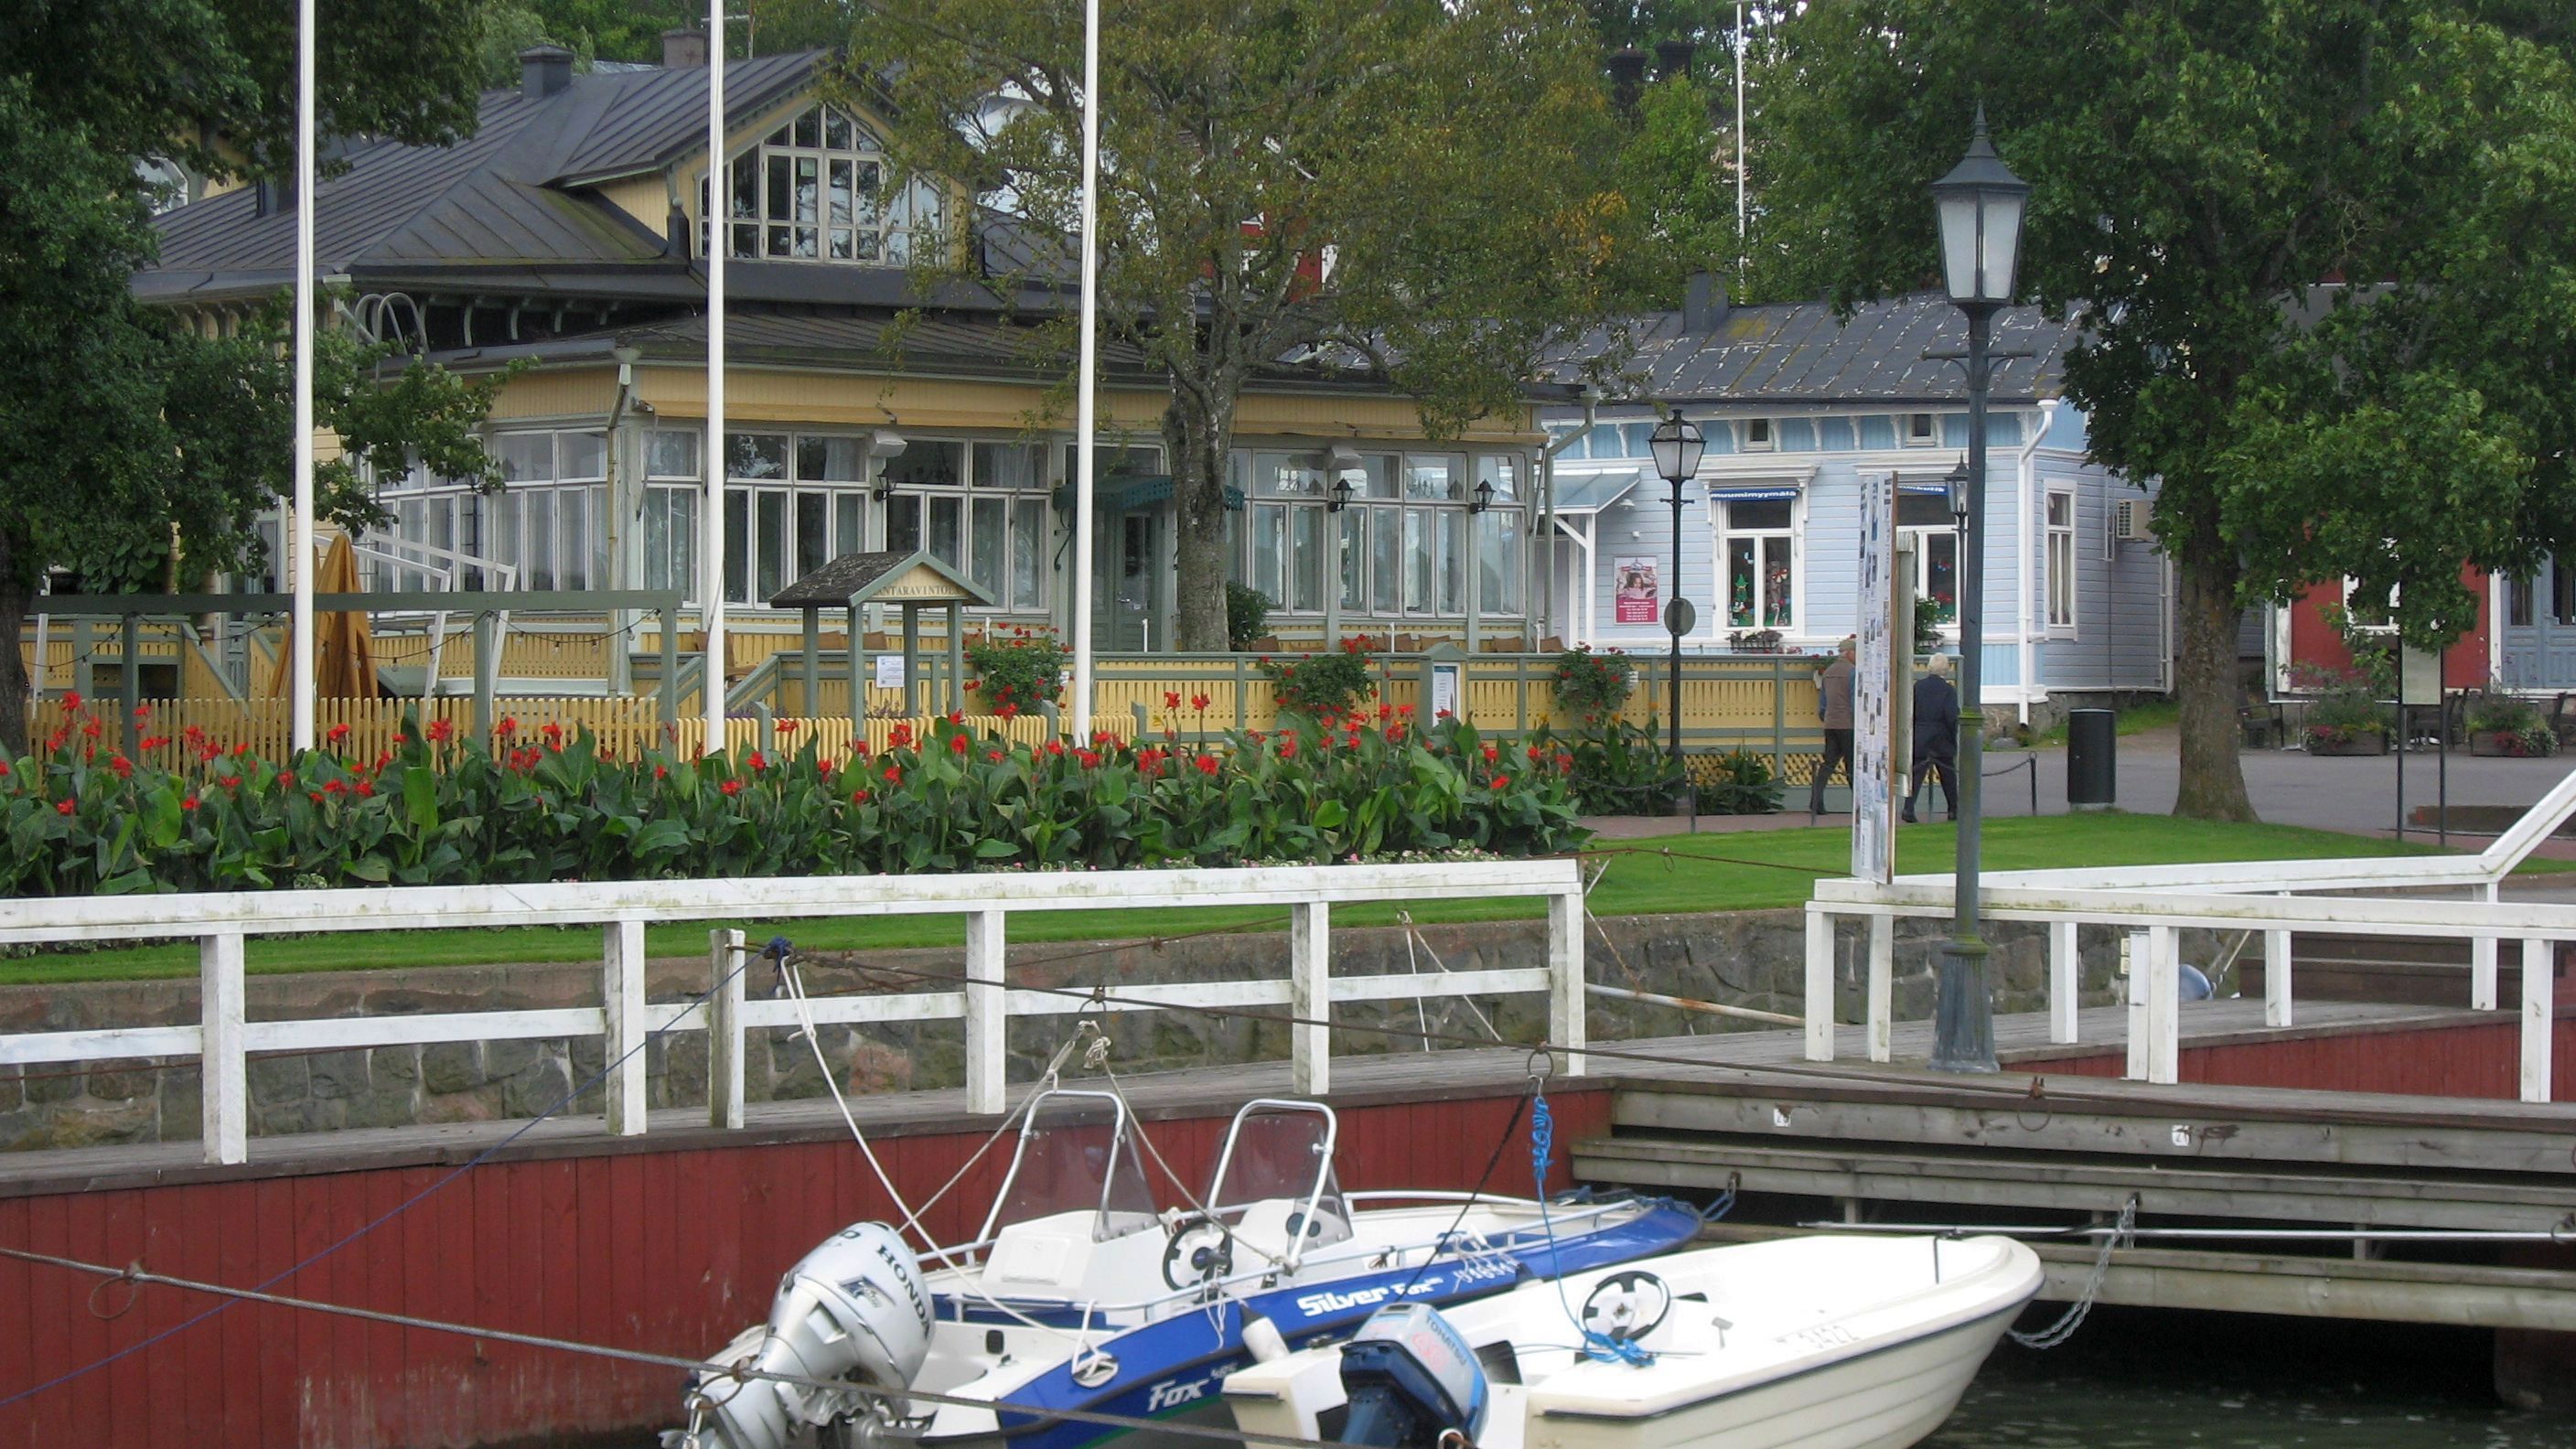 A Restaurant at the Boat Harbor 